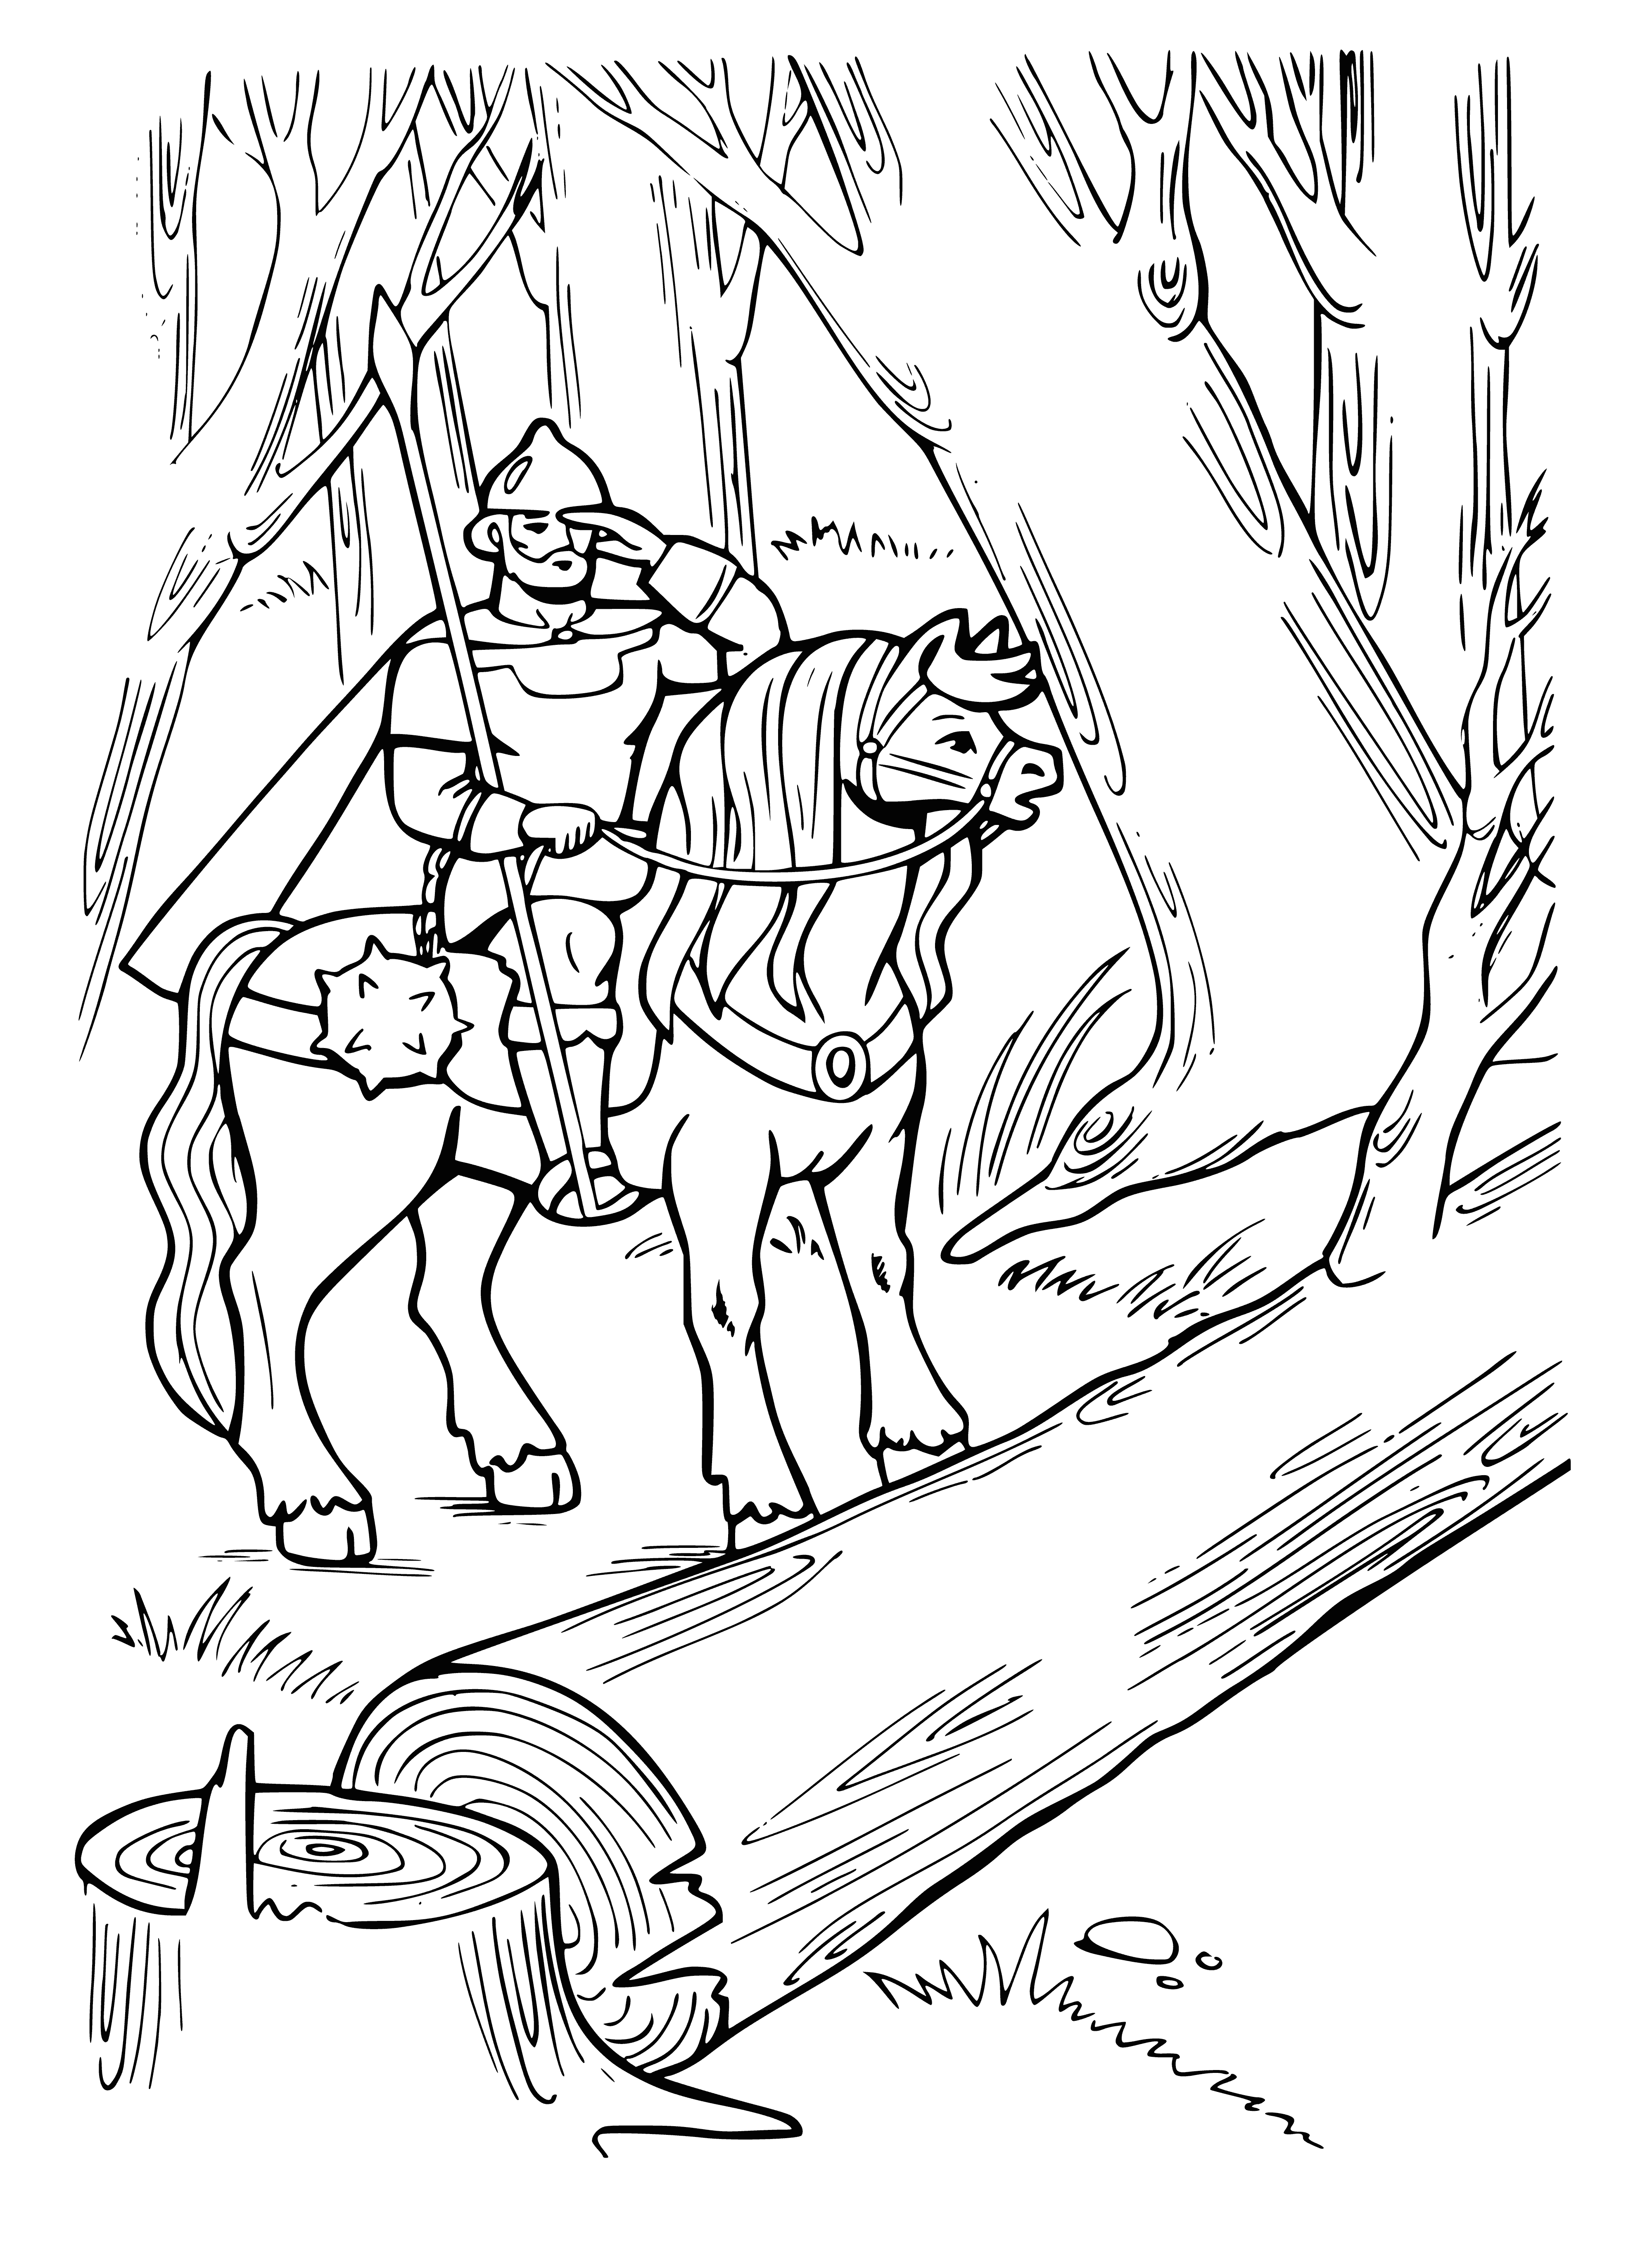 coloring page: Group of people around fallen tree, laughing and enjoying themselves, with a cup near the tree.